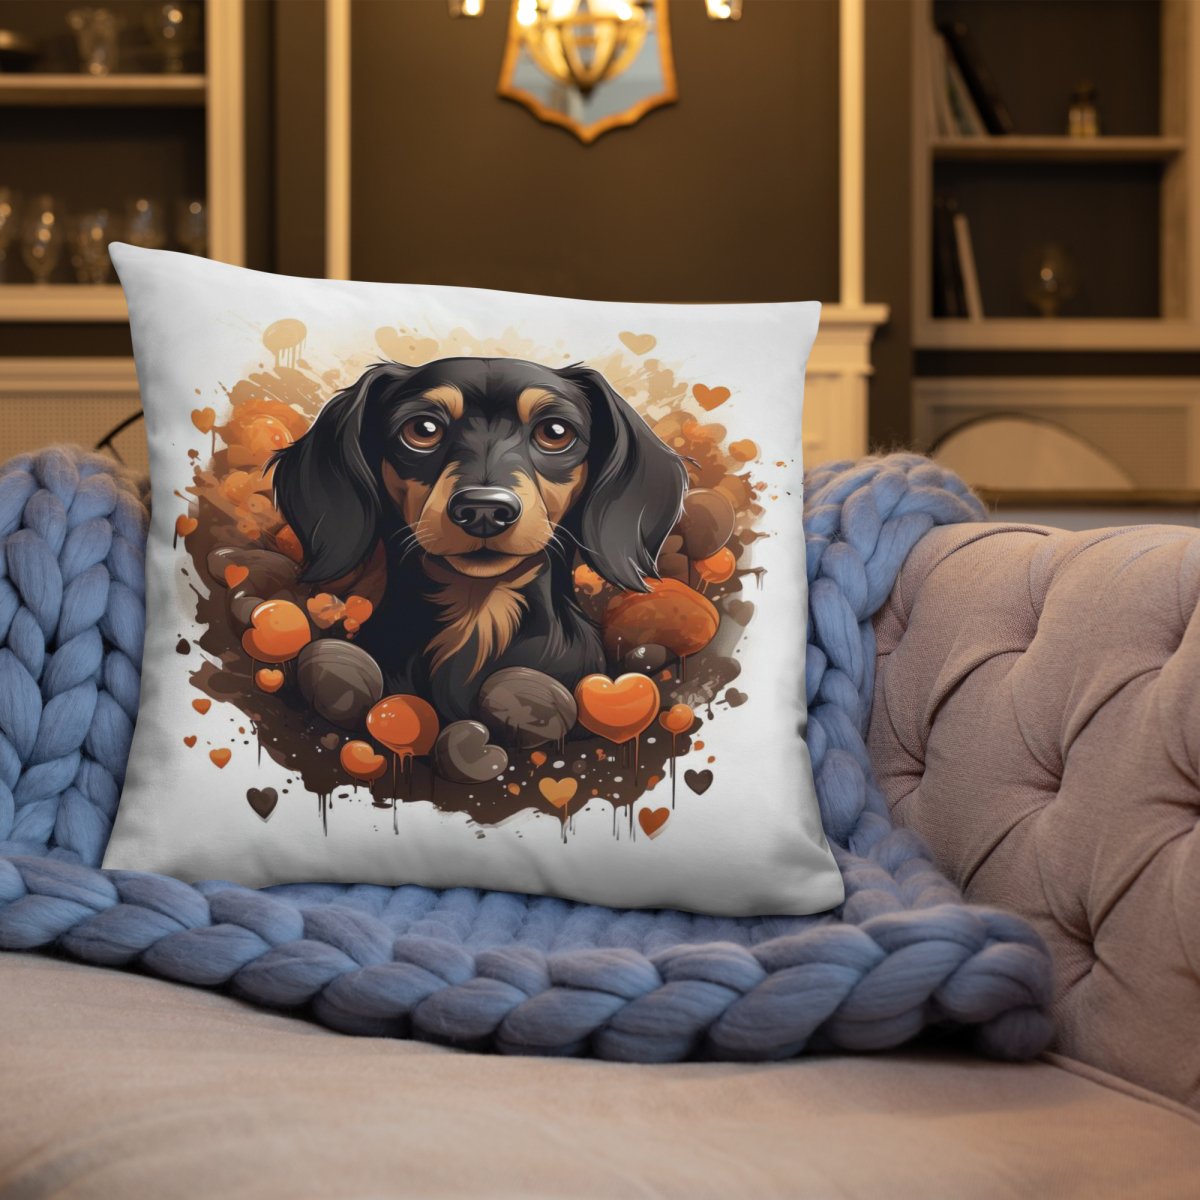 Doxie Chocolate Love Throw Pillow - Funny Nikko